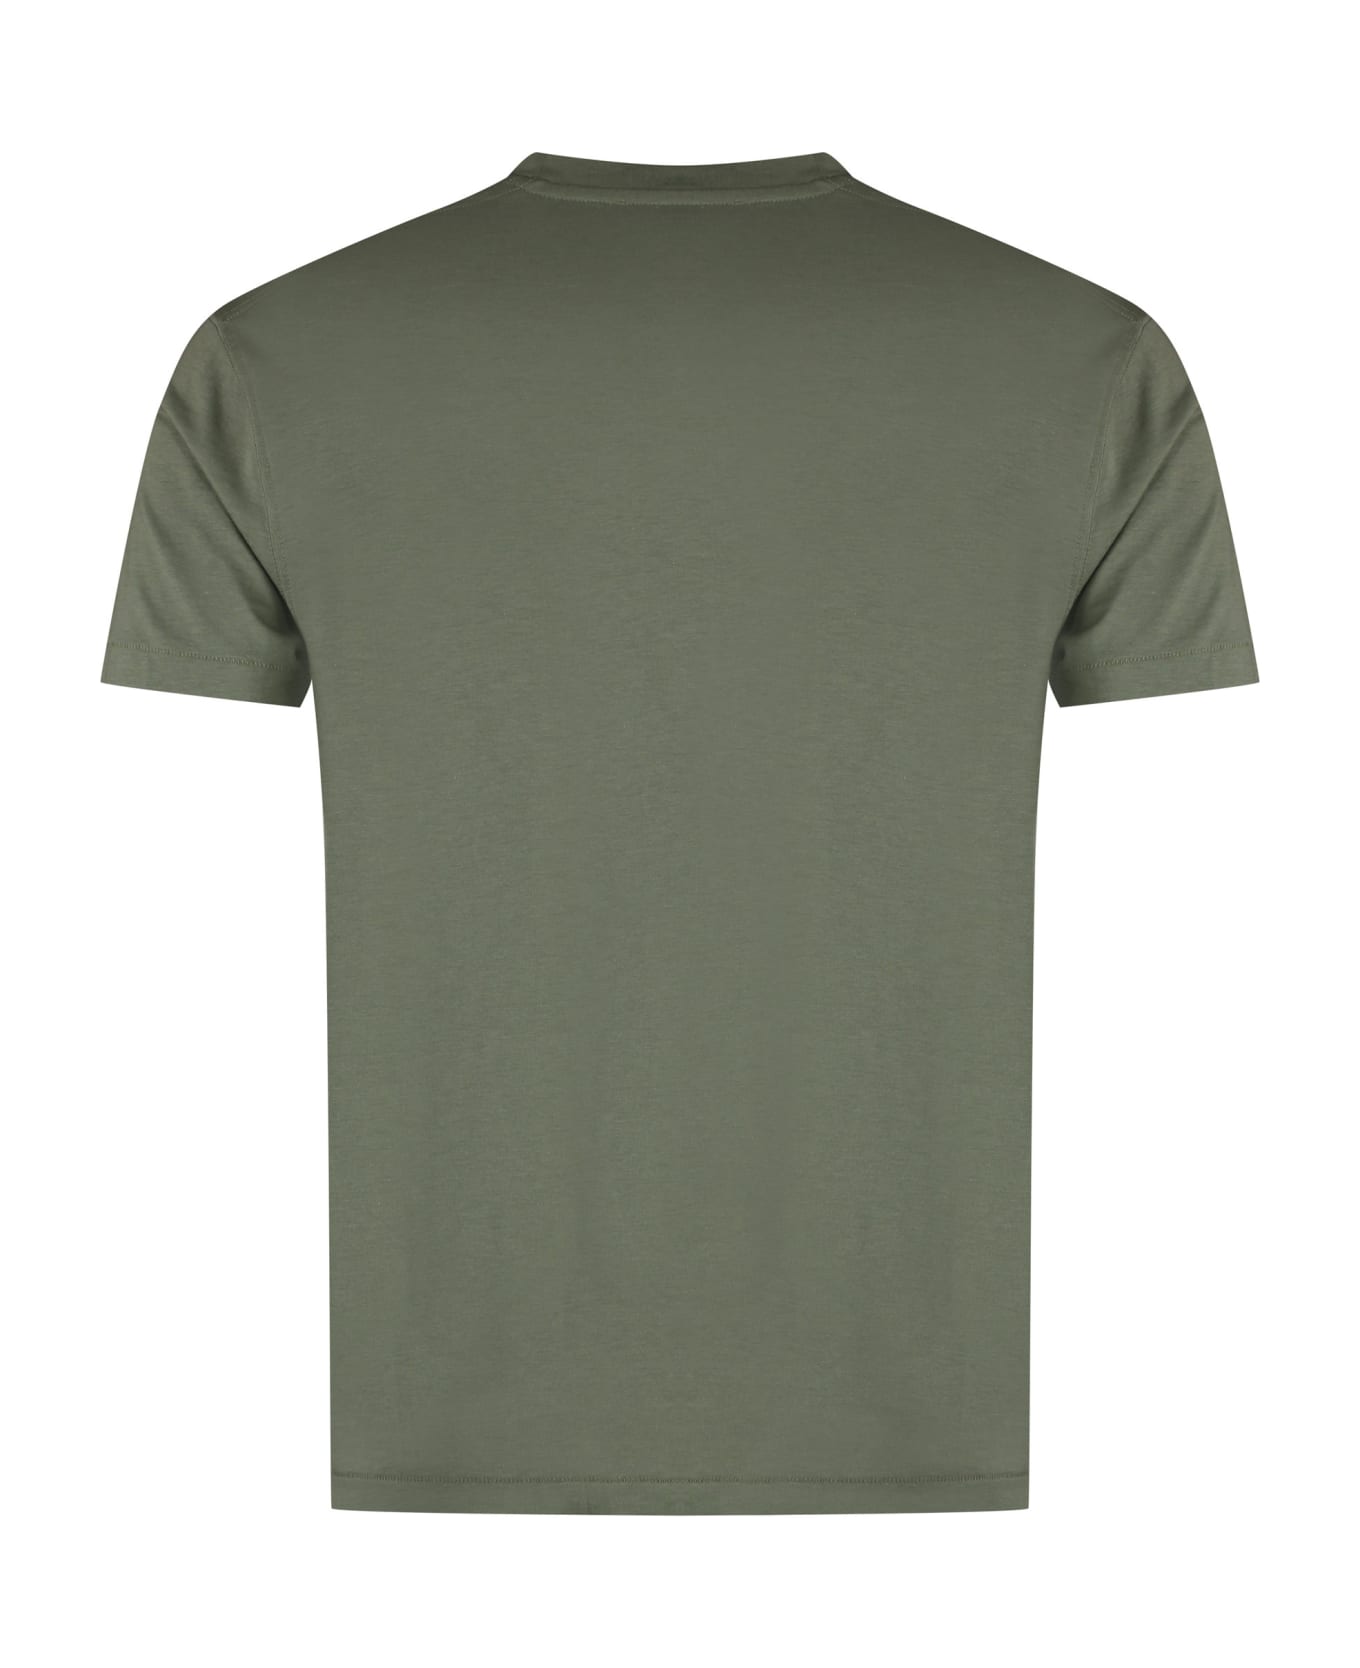 Tom Ford Cotton Blend T-shirt - green シャツ